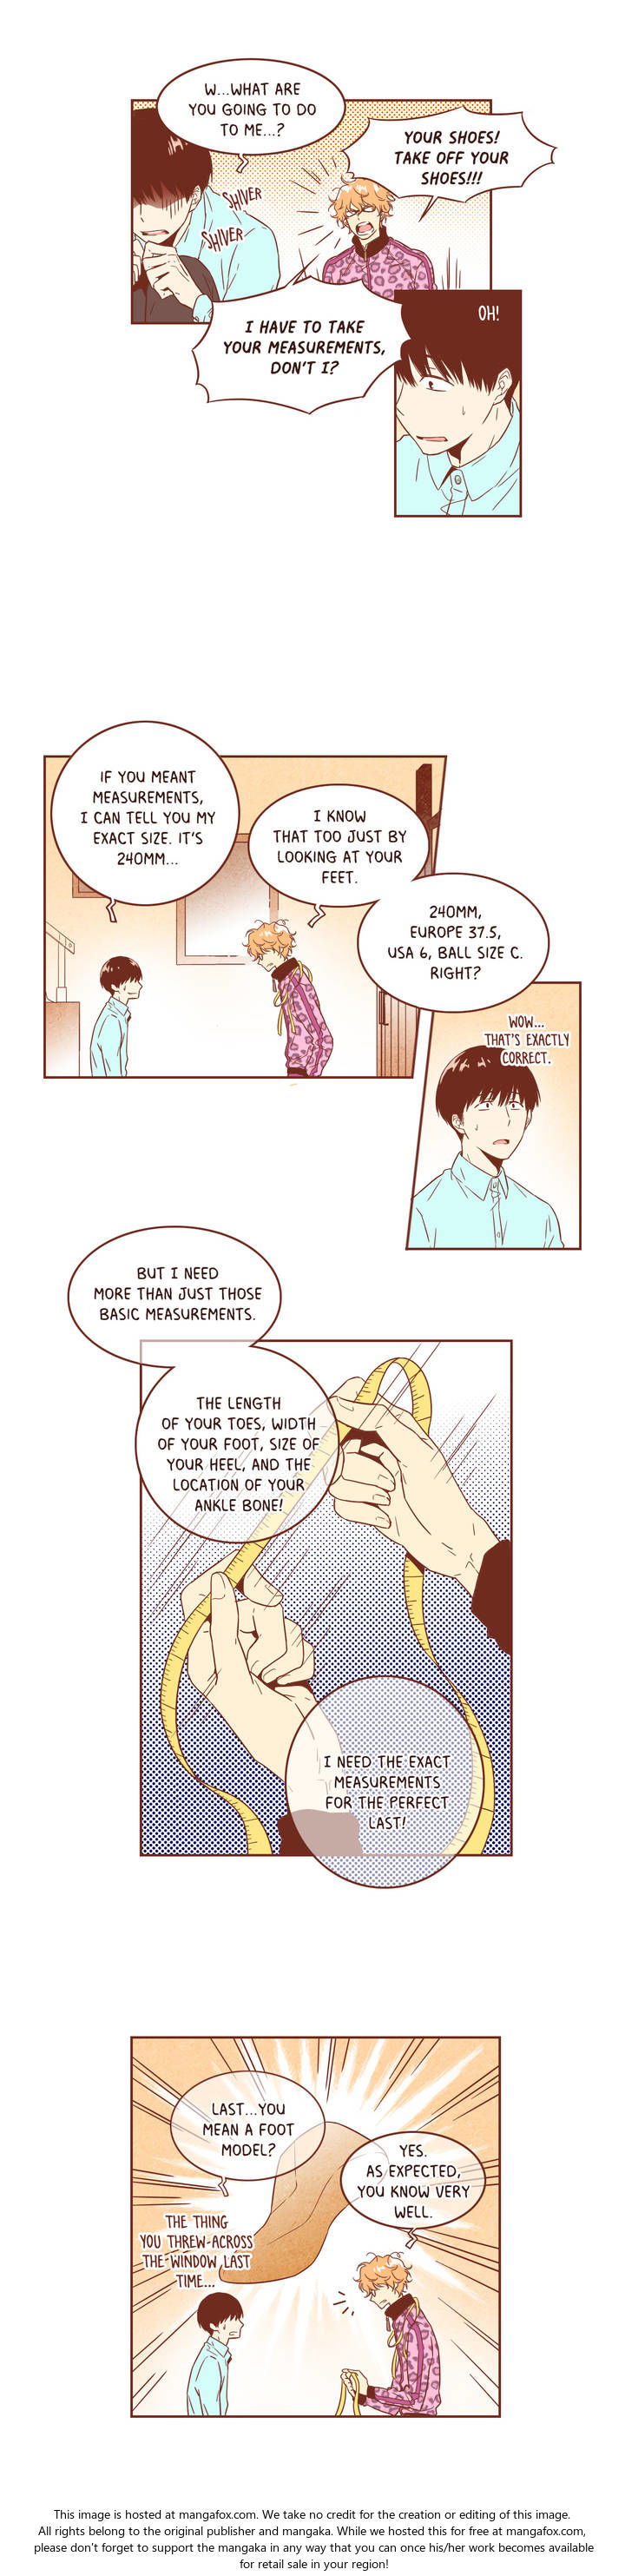 Why Did Men Stop Wearing High Heels? Chapter 013 page 13